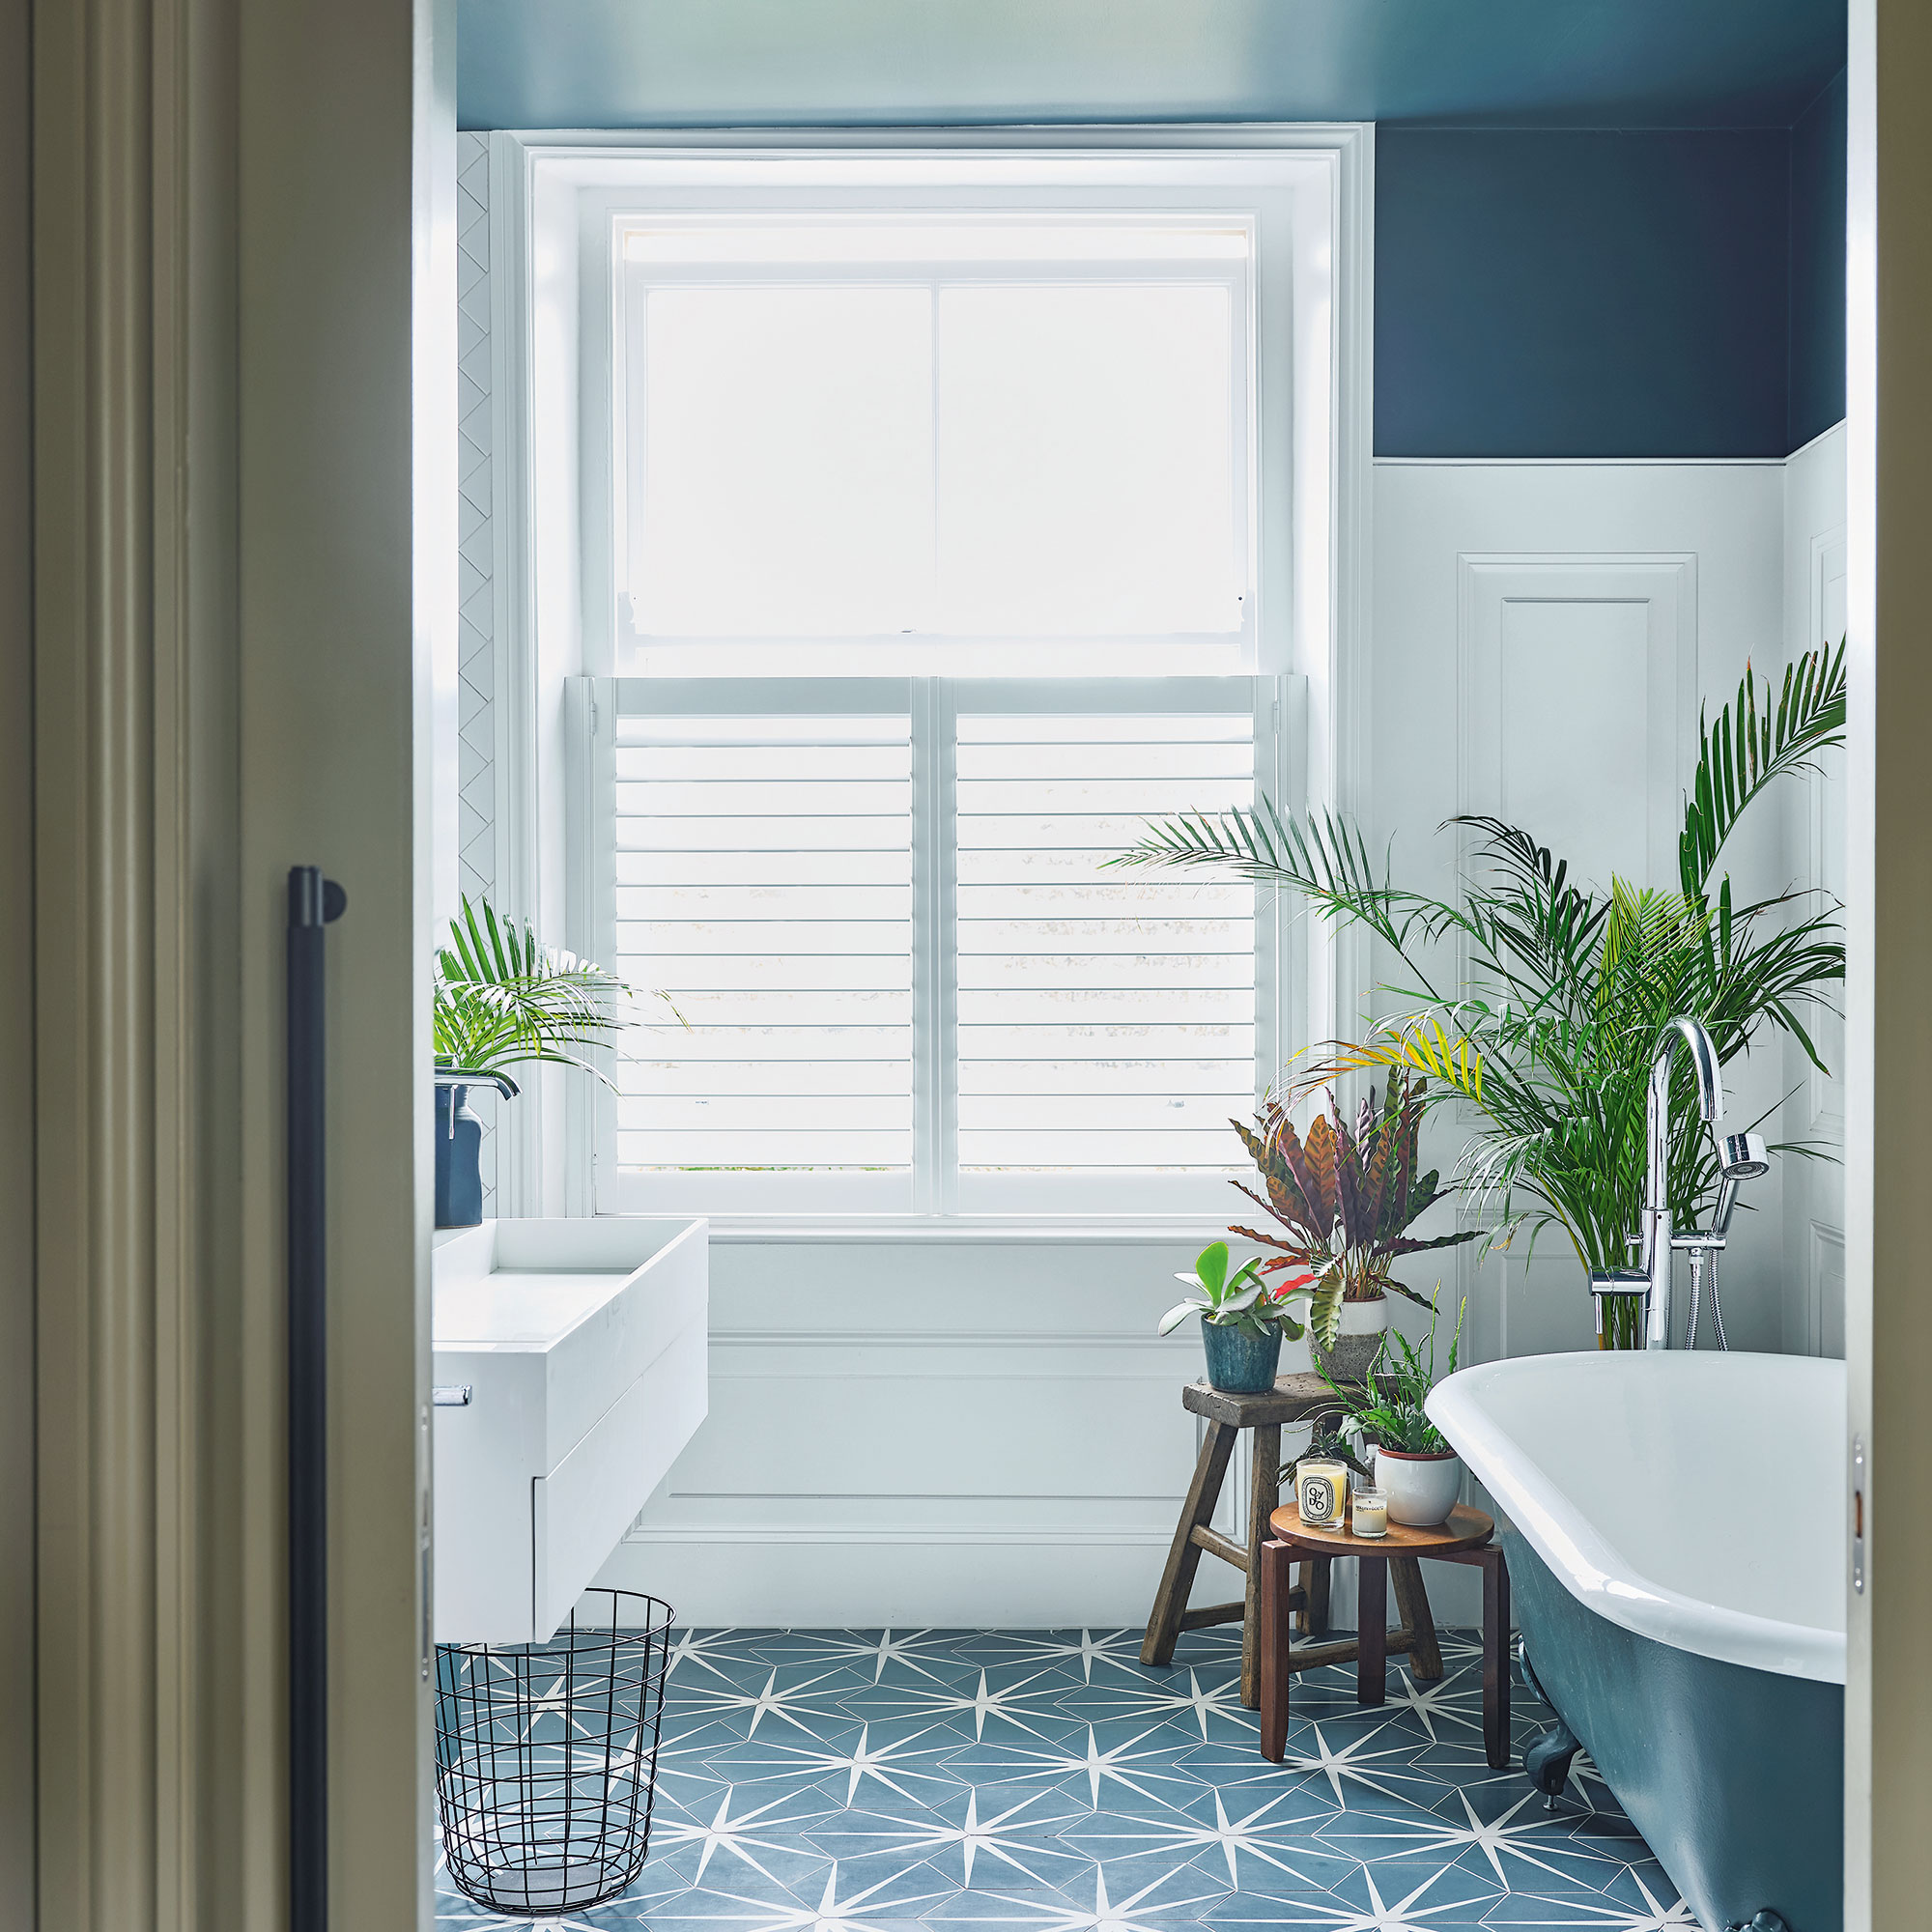 White bathroom with blue painted ceiling and bath, and patterned tile floor